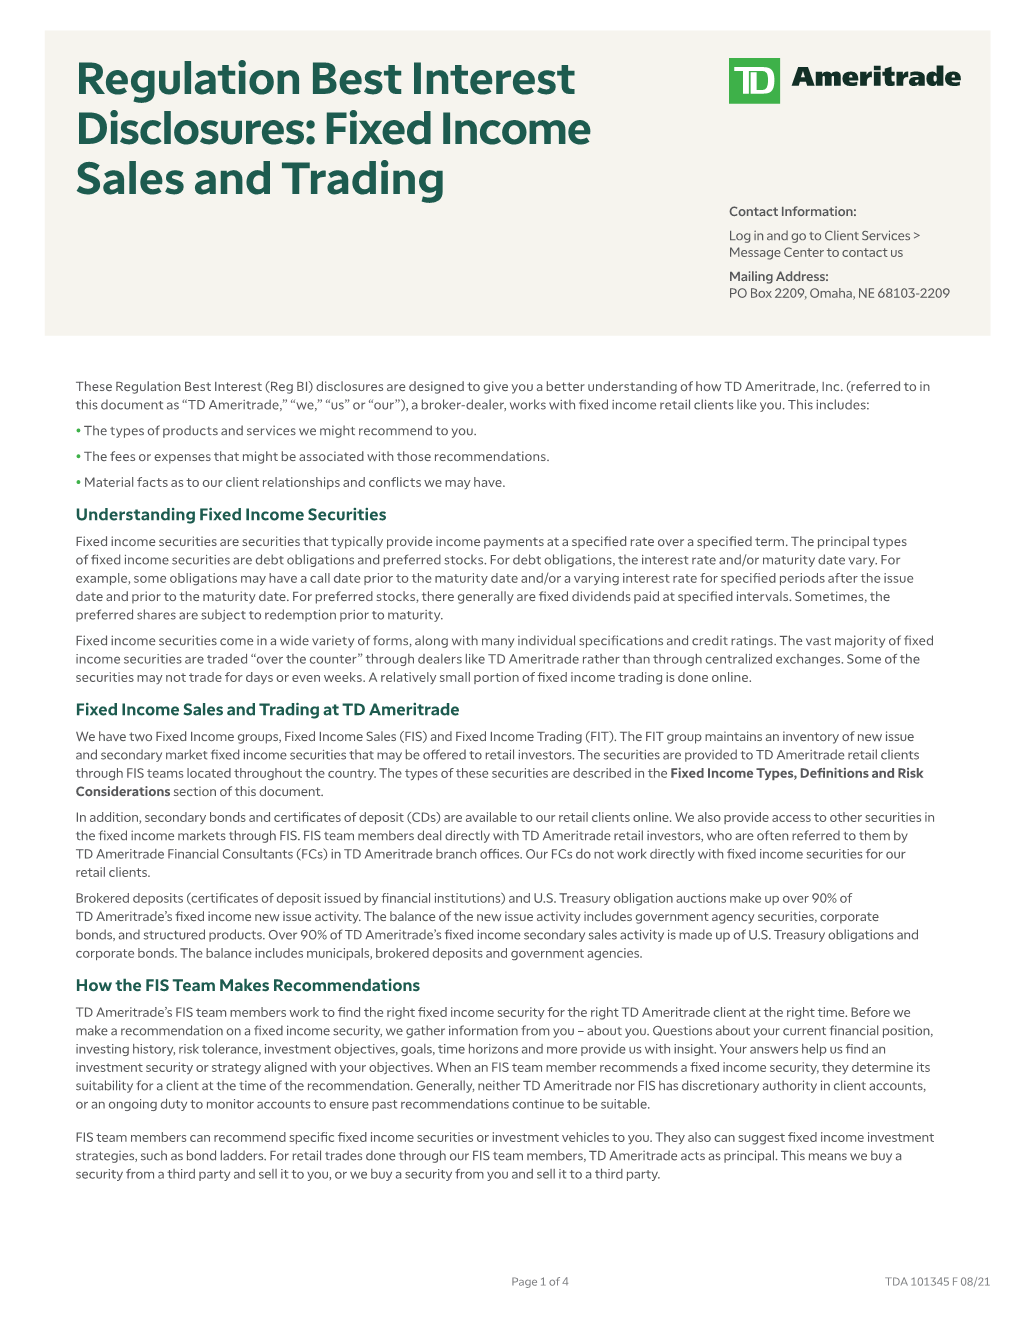 Regulation Best Interest Disclosures: Fixed Income Sales and Trading